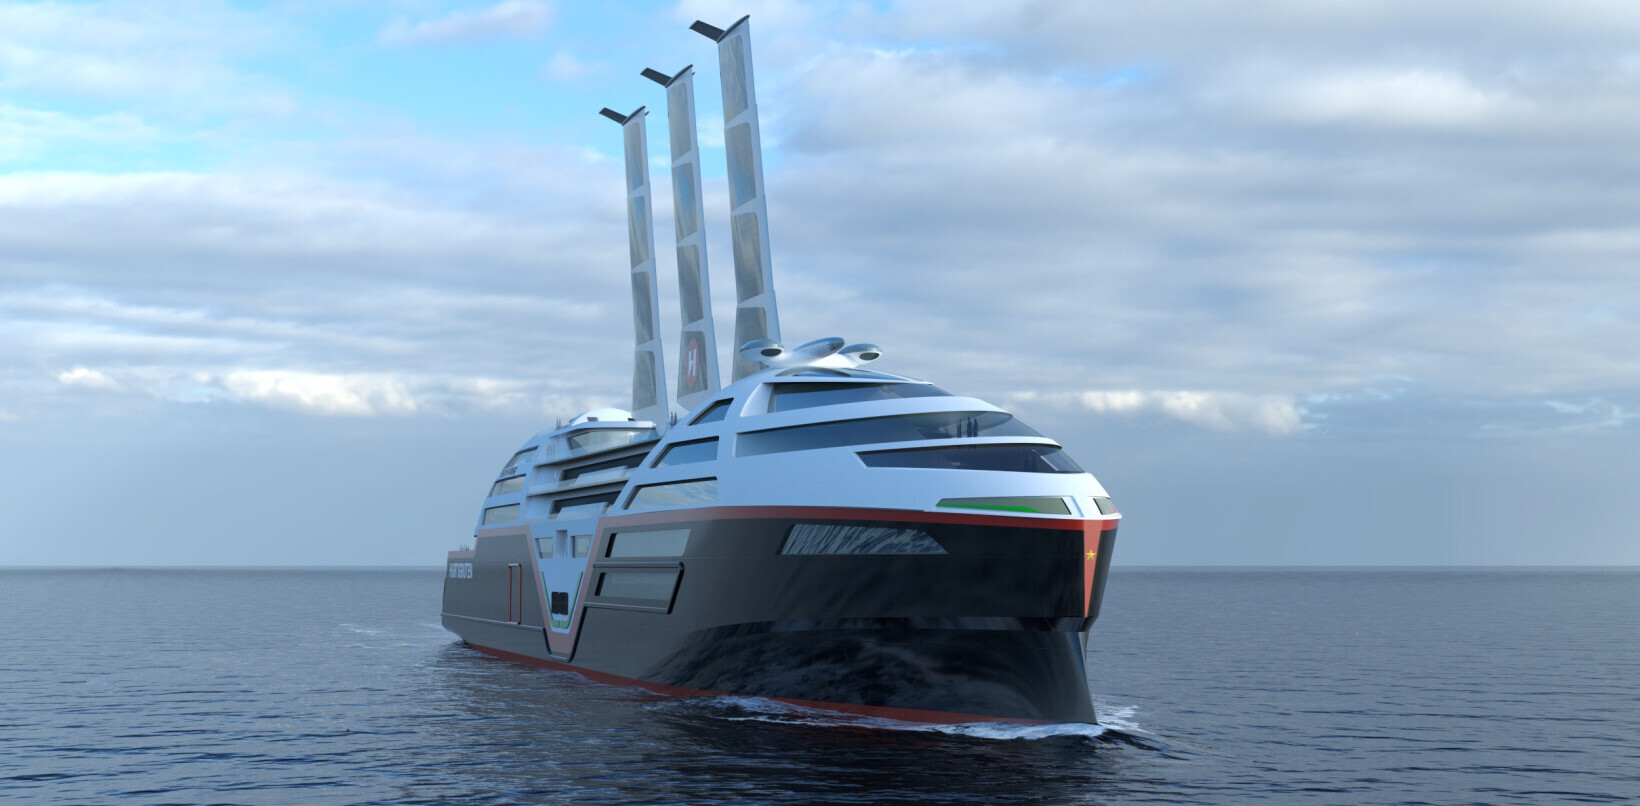 Zero-emission cruise ship with retractable solar sails set to launch in 2030